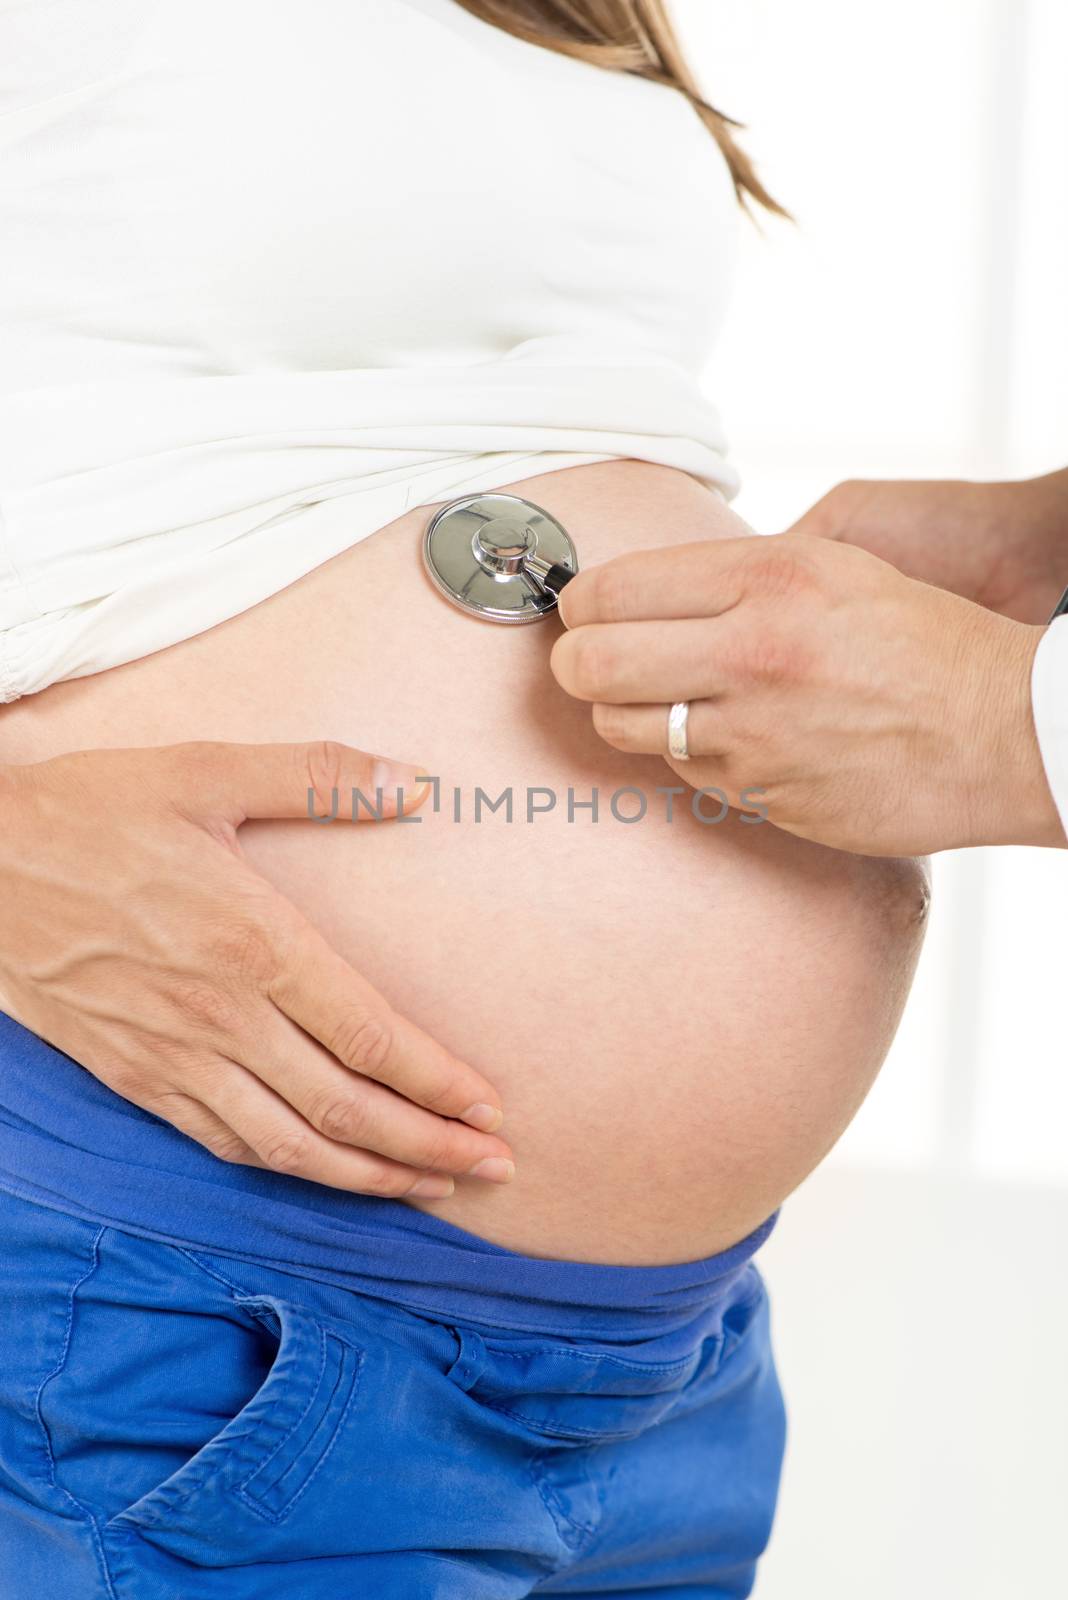 Pregnant woman examining by a doctor with a stethoscope